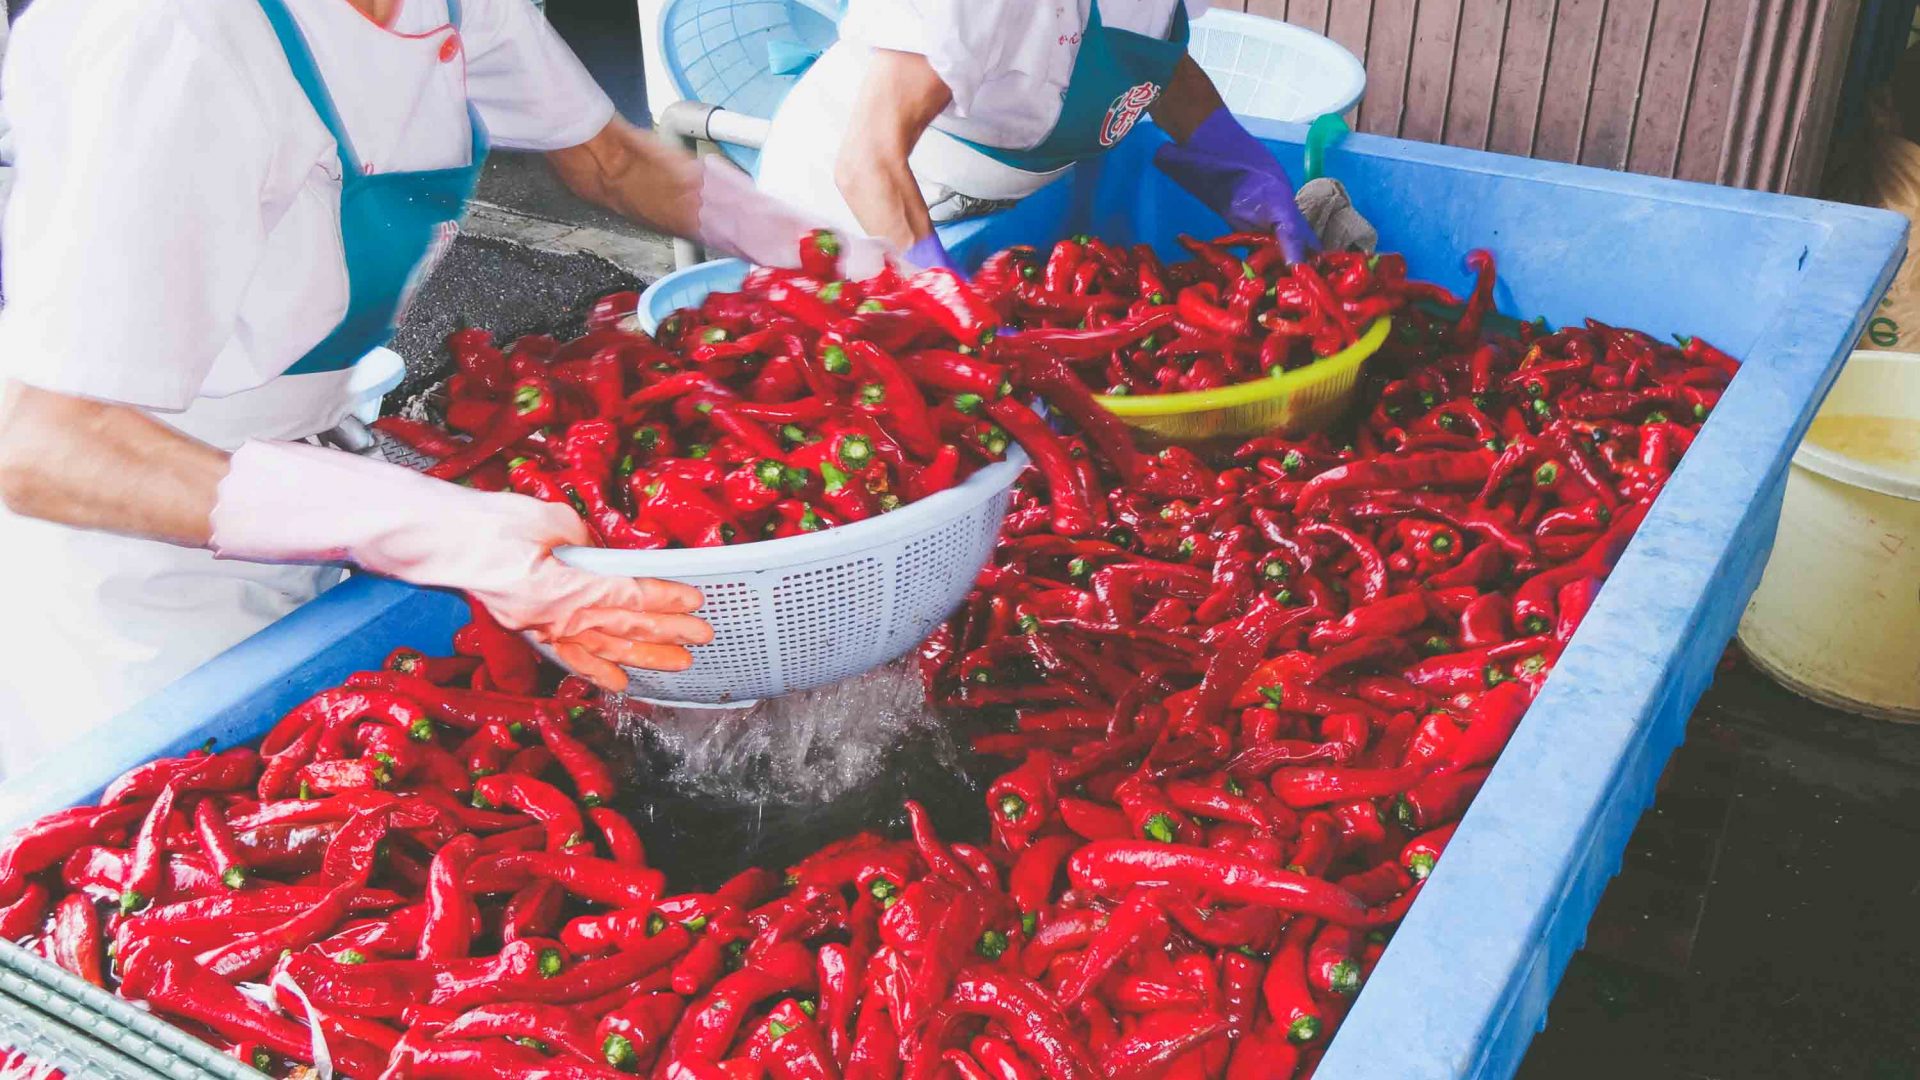 The chillies are salted at the Kanzuri factory in Niigata, Japan.